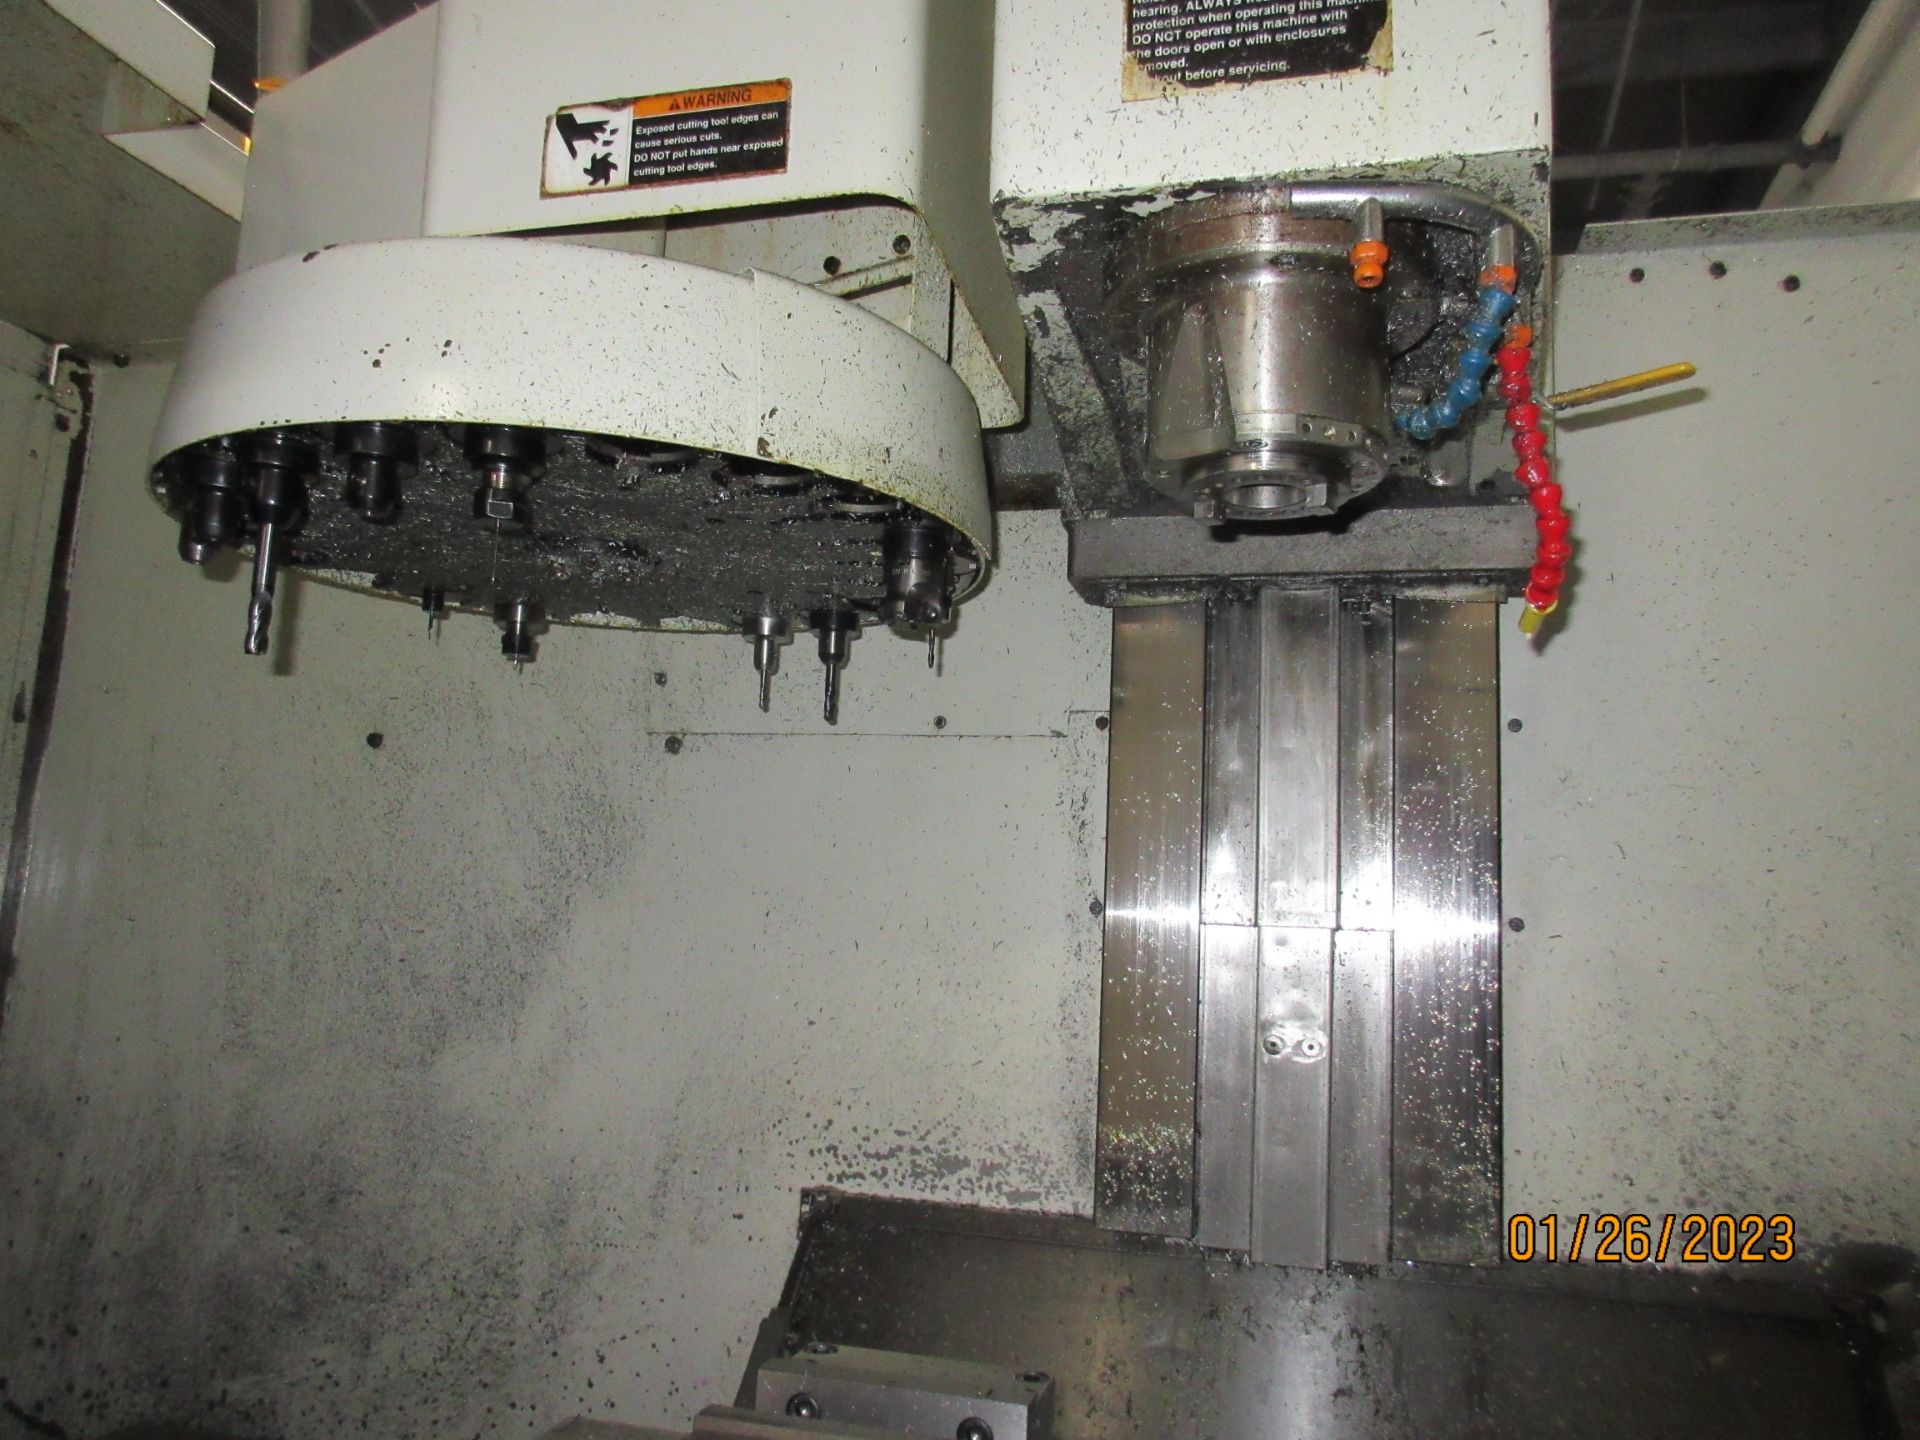 1998 FADAL MODEL: 906 VMC4020 VERTICAL MACHINING CENTER WITH FADAL CNC 88HS CONTROL, 230/440VAC, - Image 13 of 19